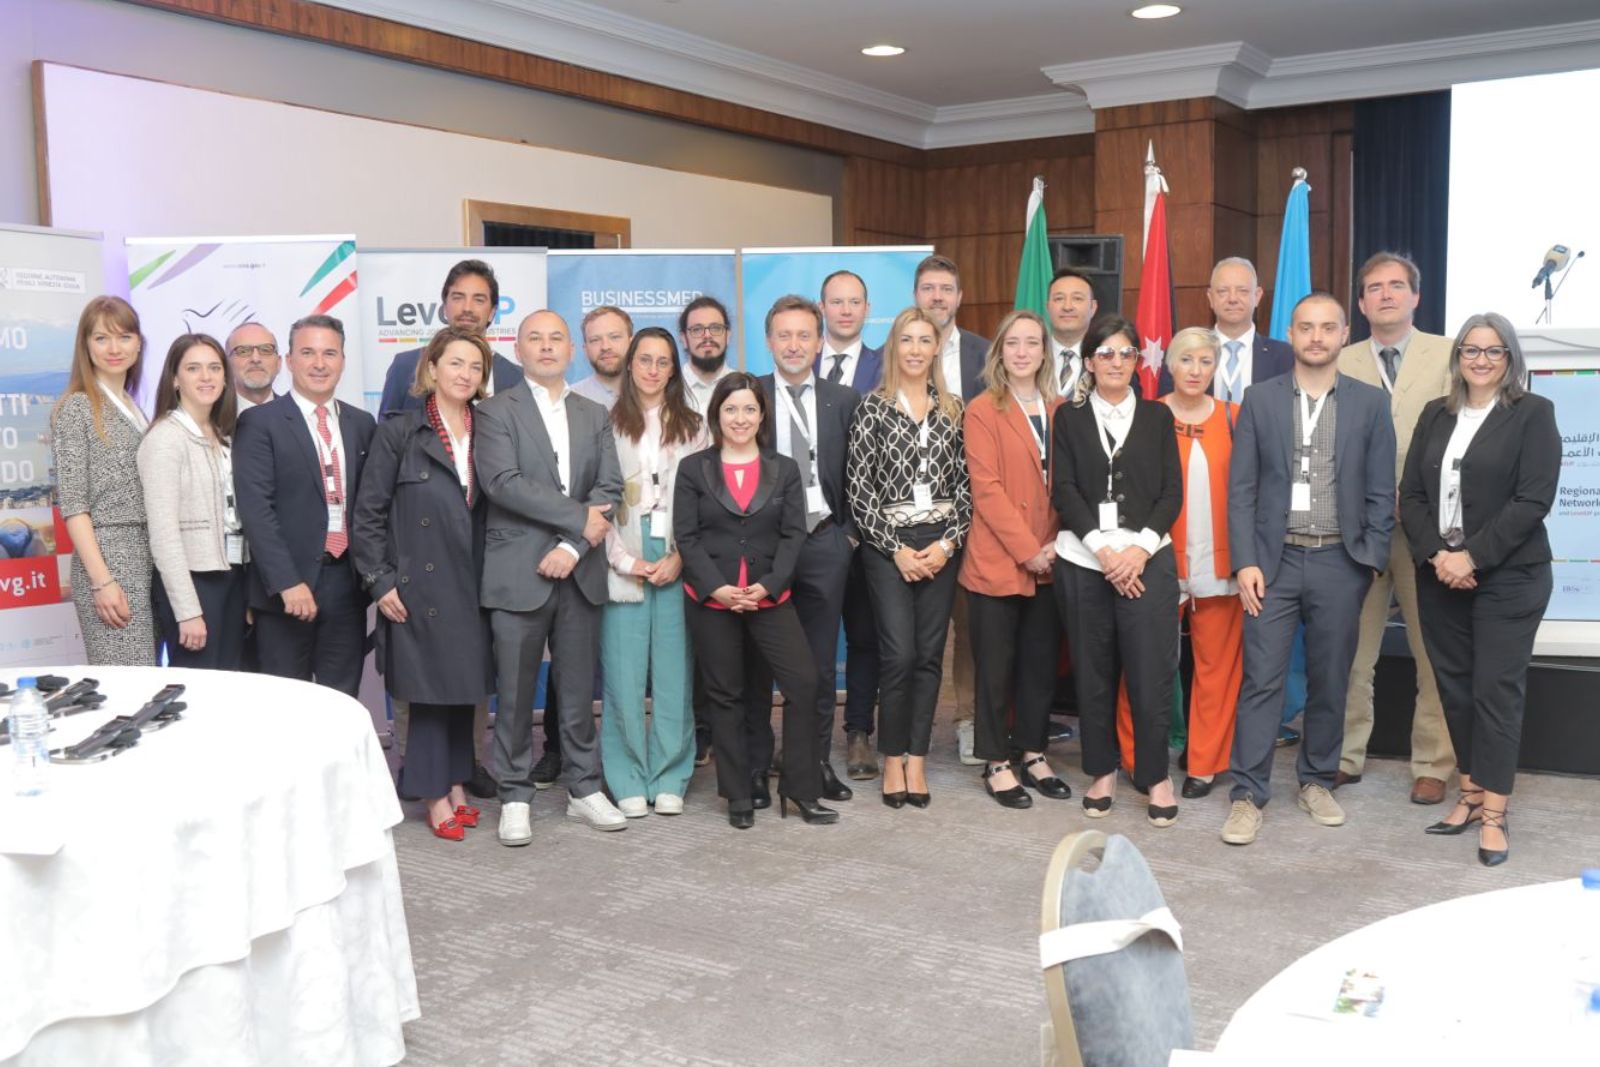 Jordan: “Regional Business Networking Forum and LevelUp Project Achievement” in Amman